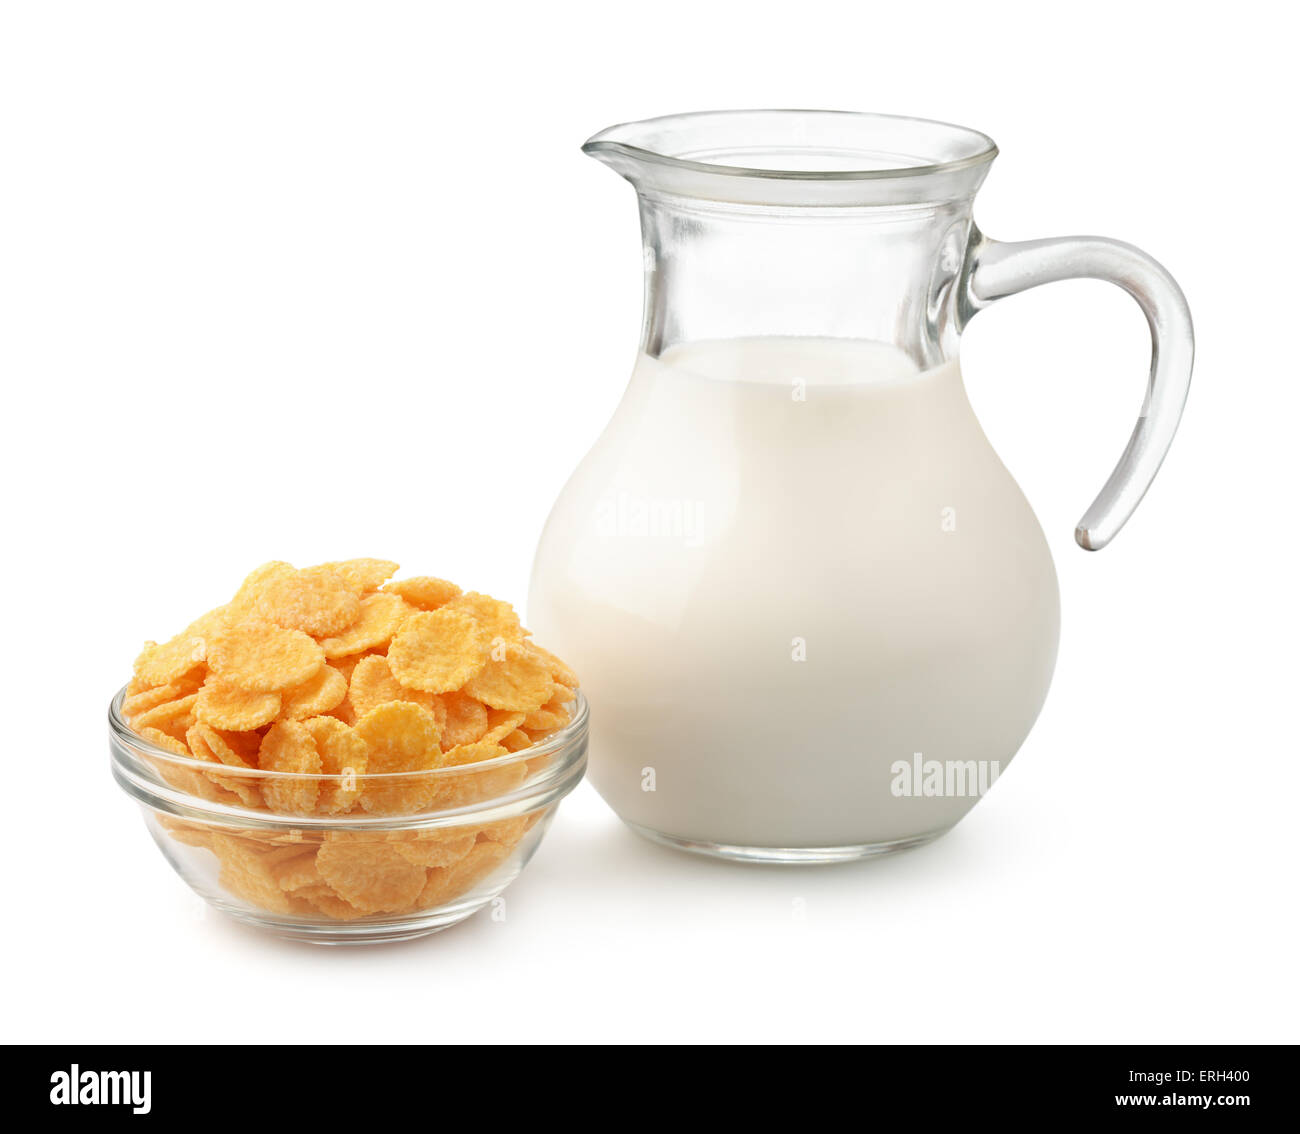 Corn flakes and jug of milk isolated on white Stock Photo